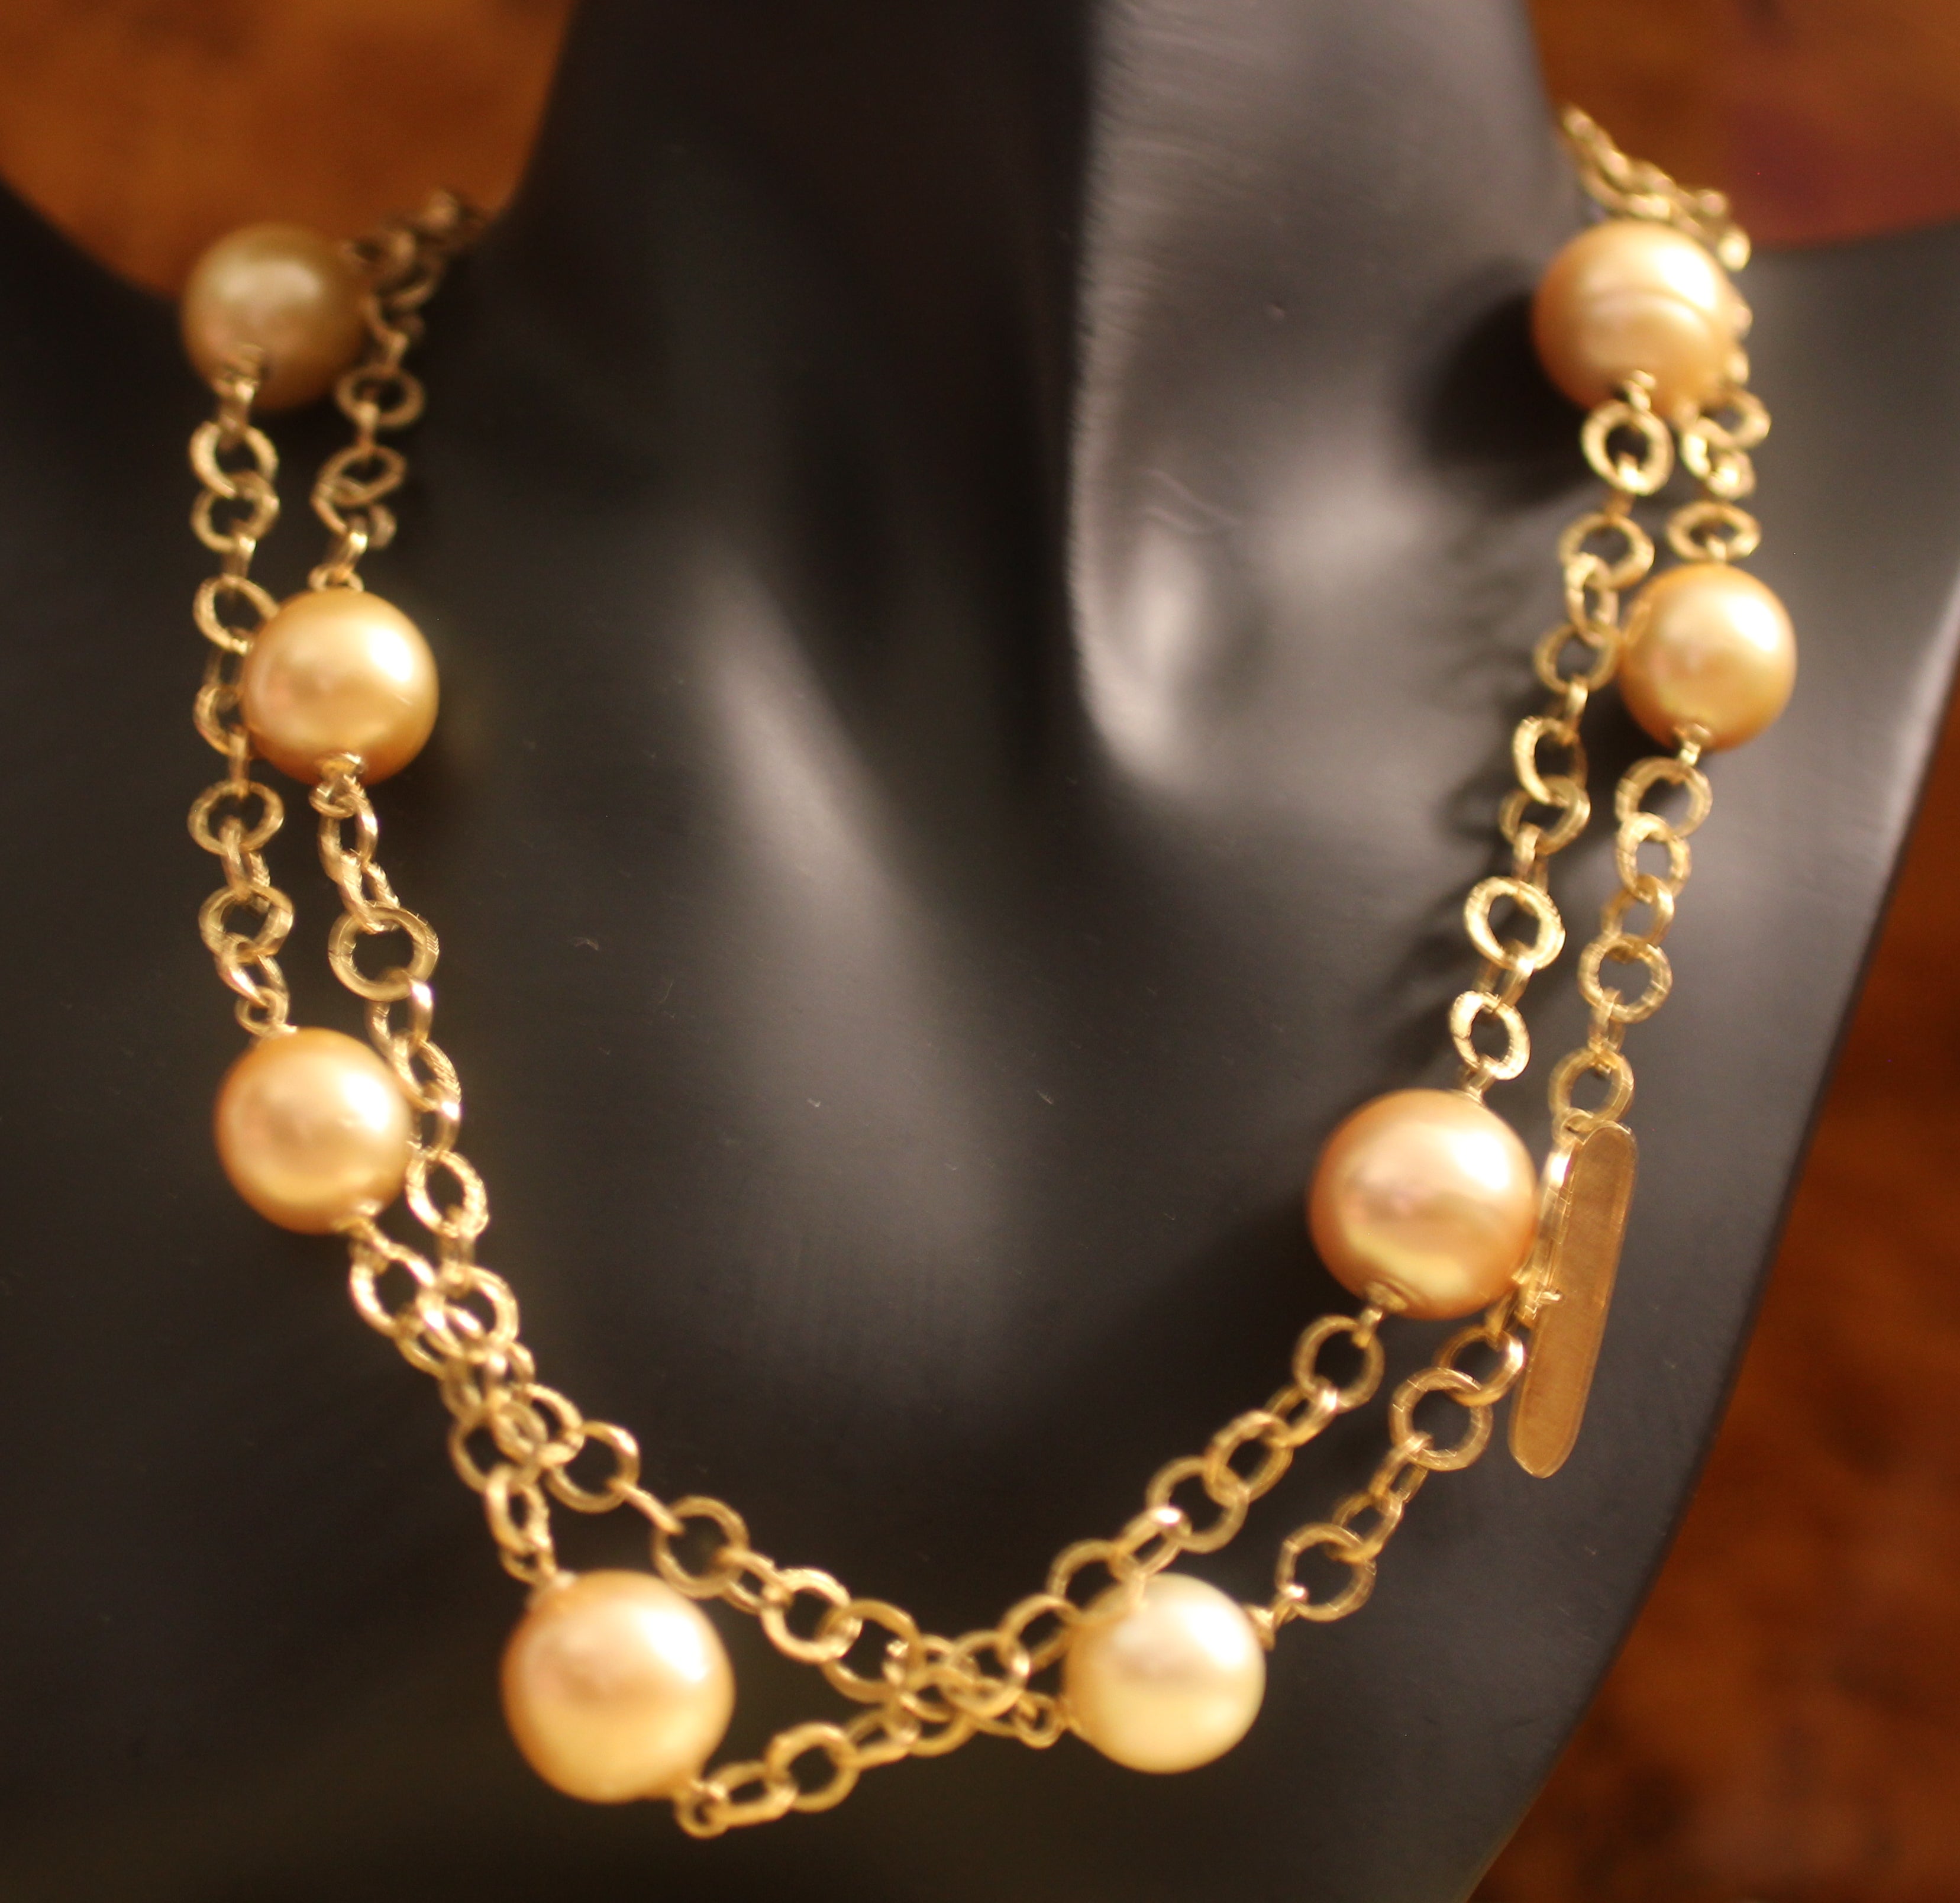 Hakimoto By Jewel Of Ocean Golden South Sea Baroque Pearl With 18K Yellow Gold Italian Handmade Chain Necklace
16.5x14mm 11 Natural Color Golden South Sea Pearls.